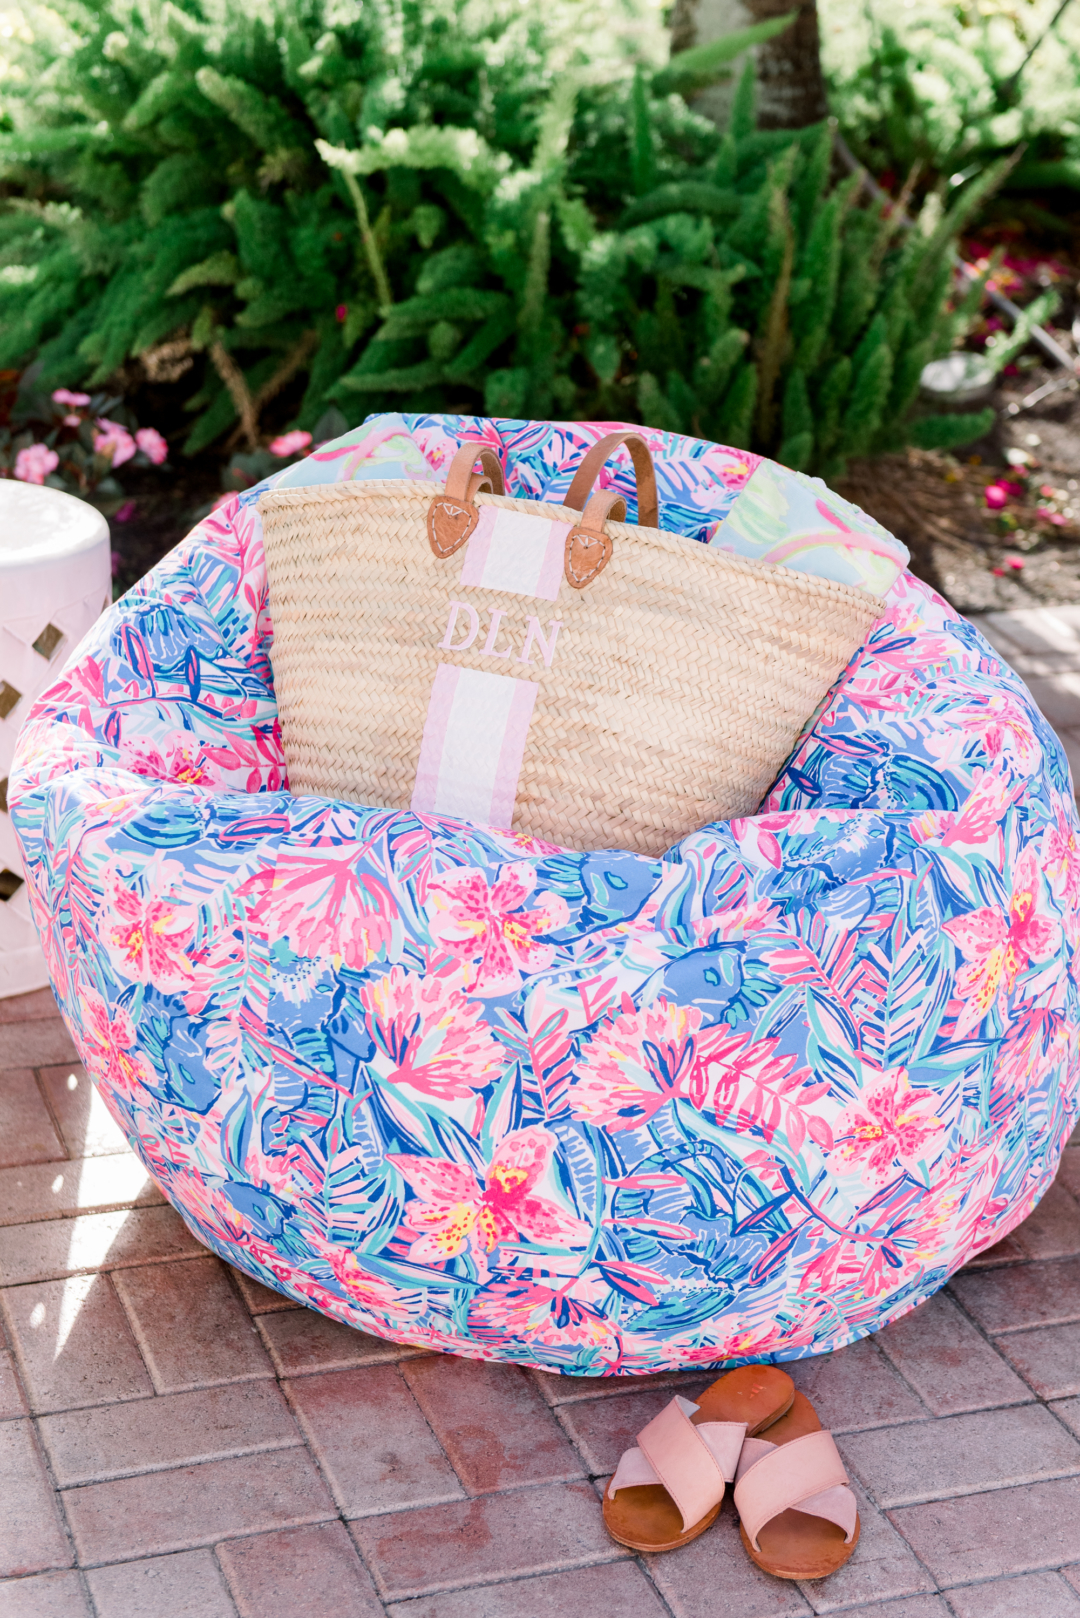 Home: Pottery Barn x Lilly Pulitzer with Palm Beach Lately